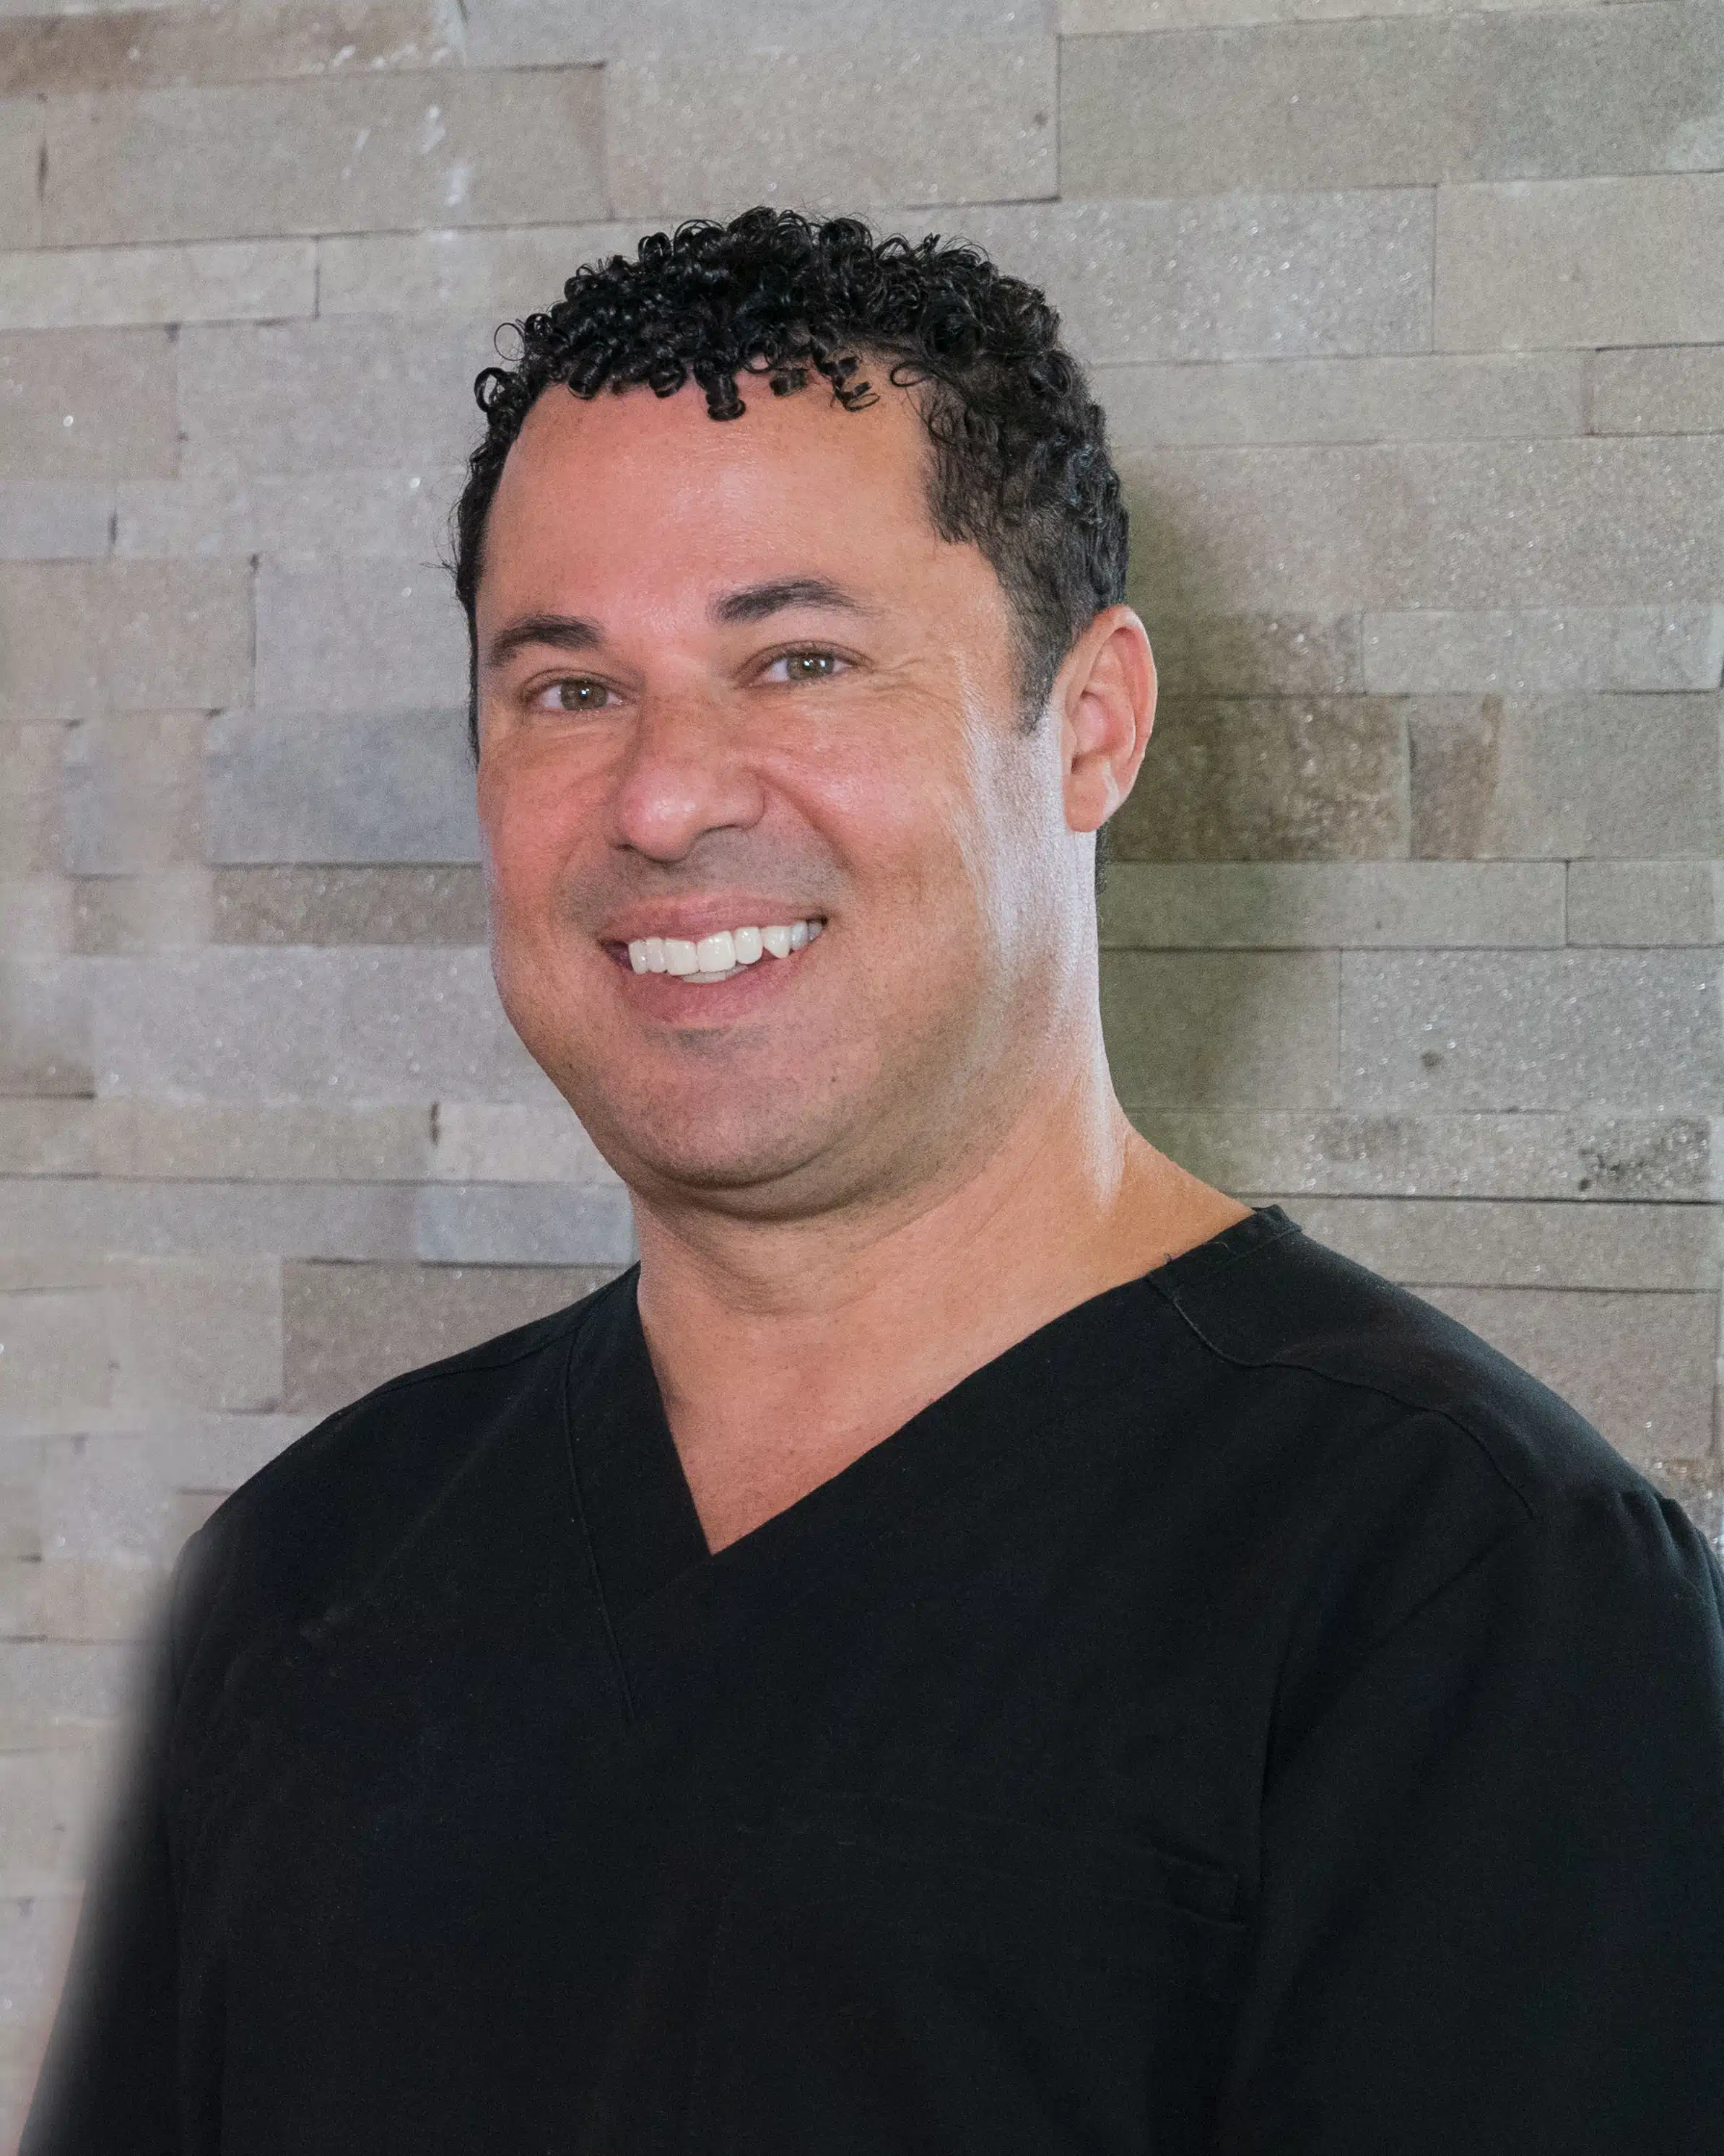 General Dentistry with a focus on complex surgical procedures and implants